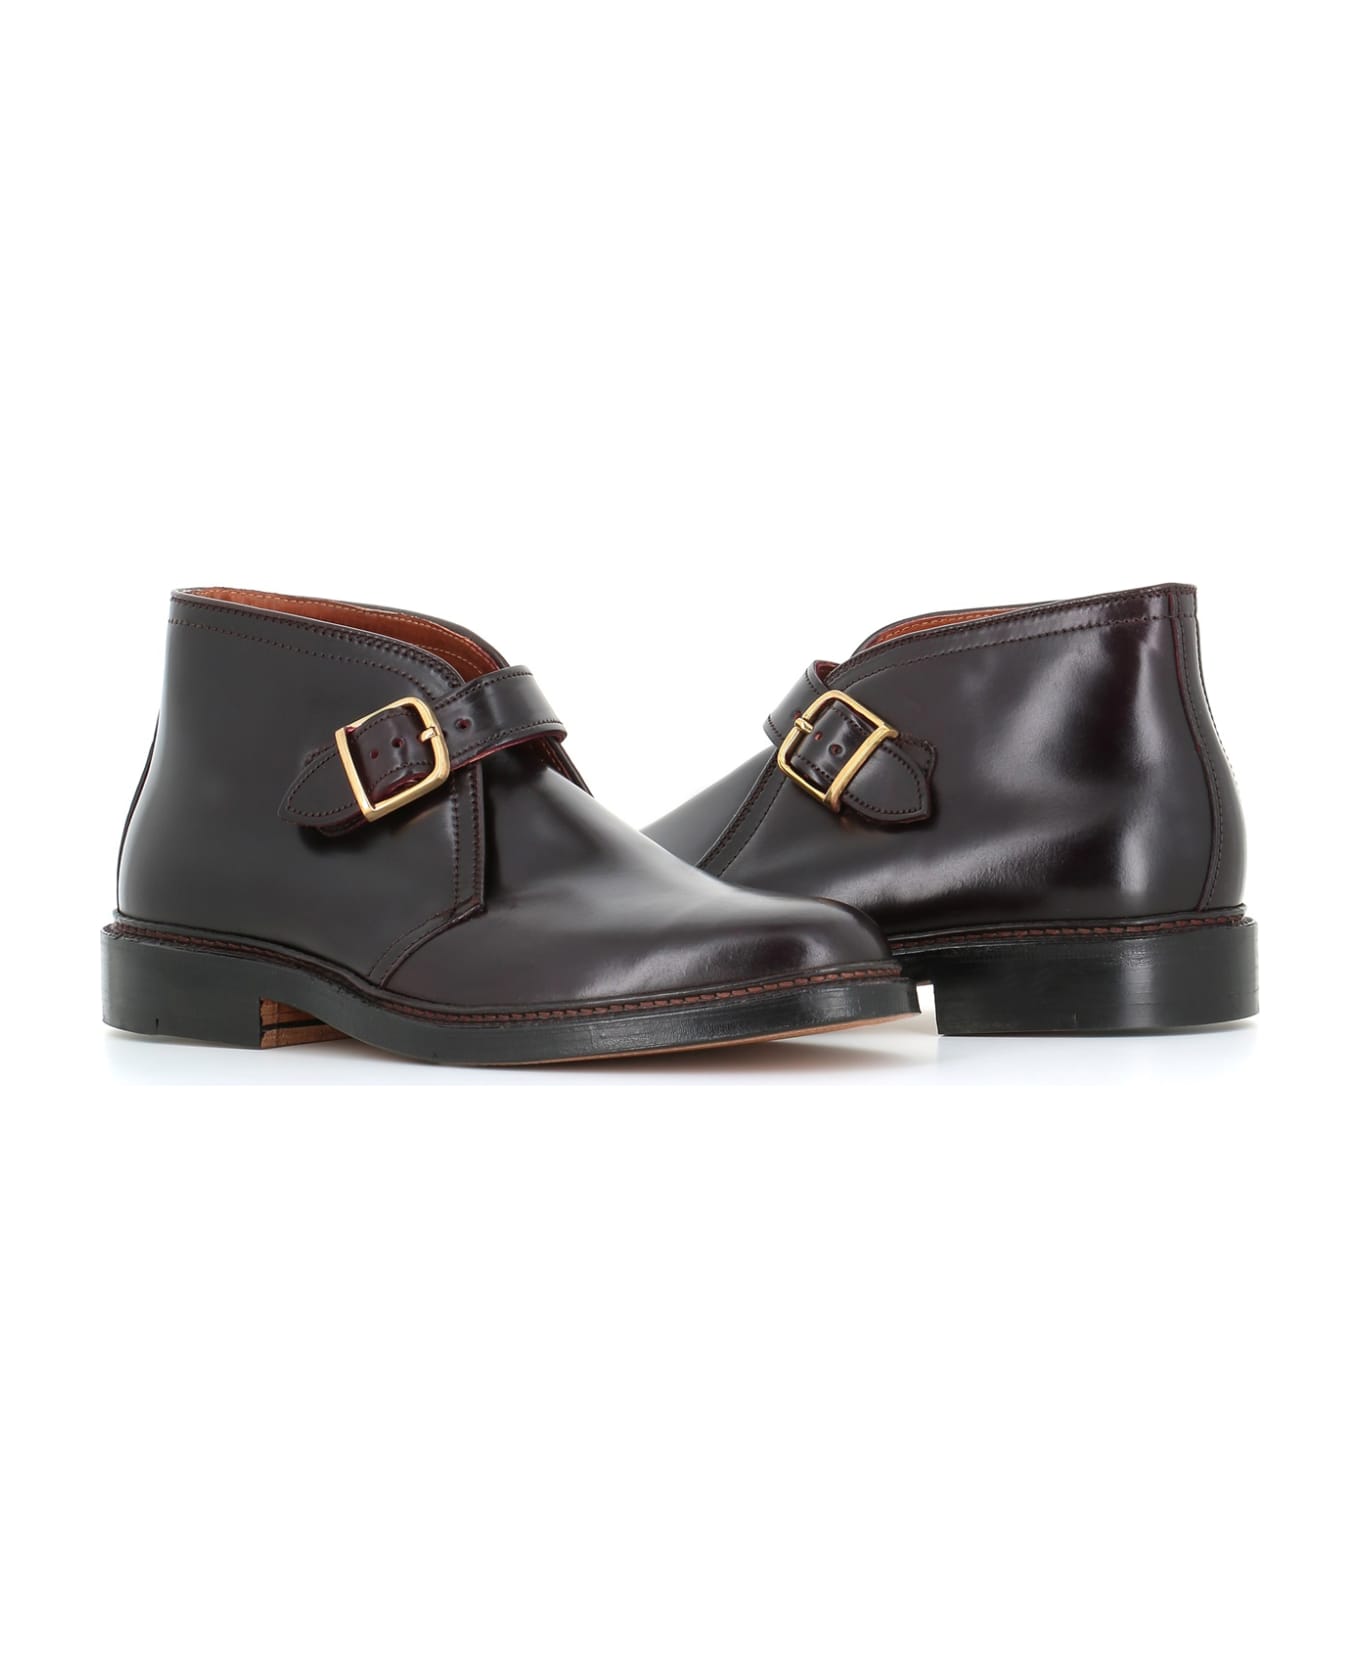 Alden Ankle Boot N6704 - Mahogany